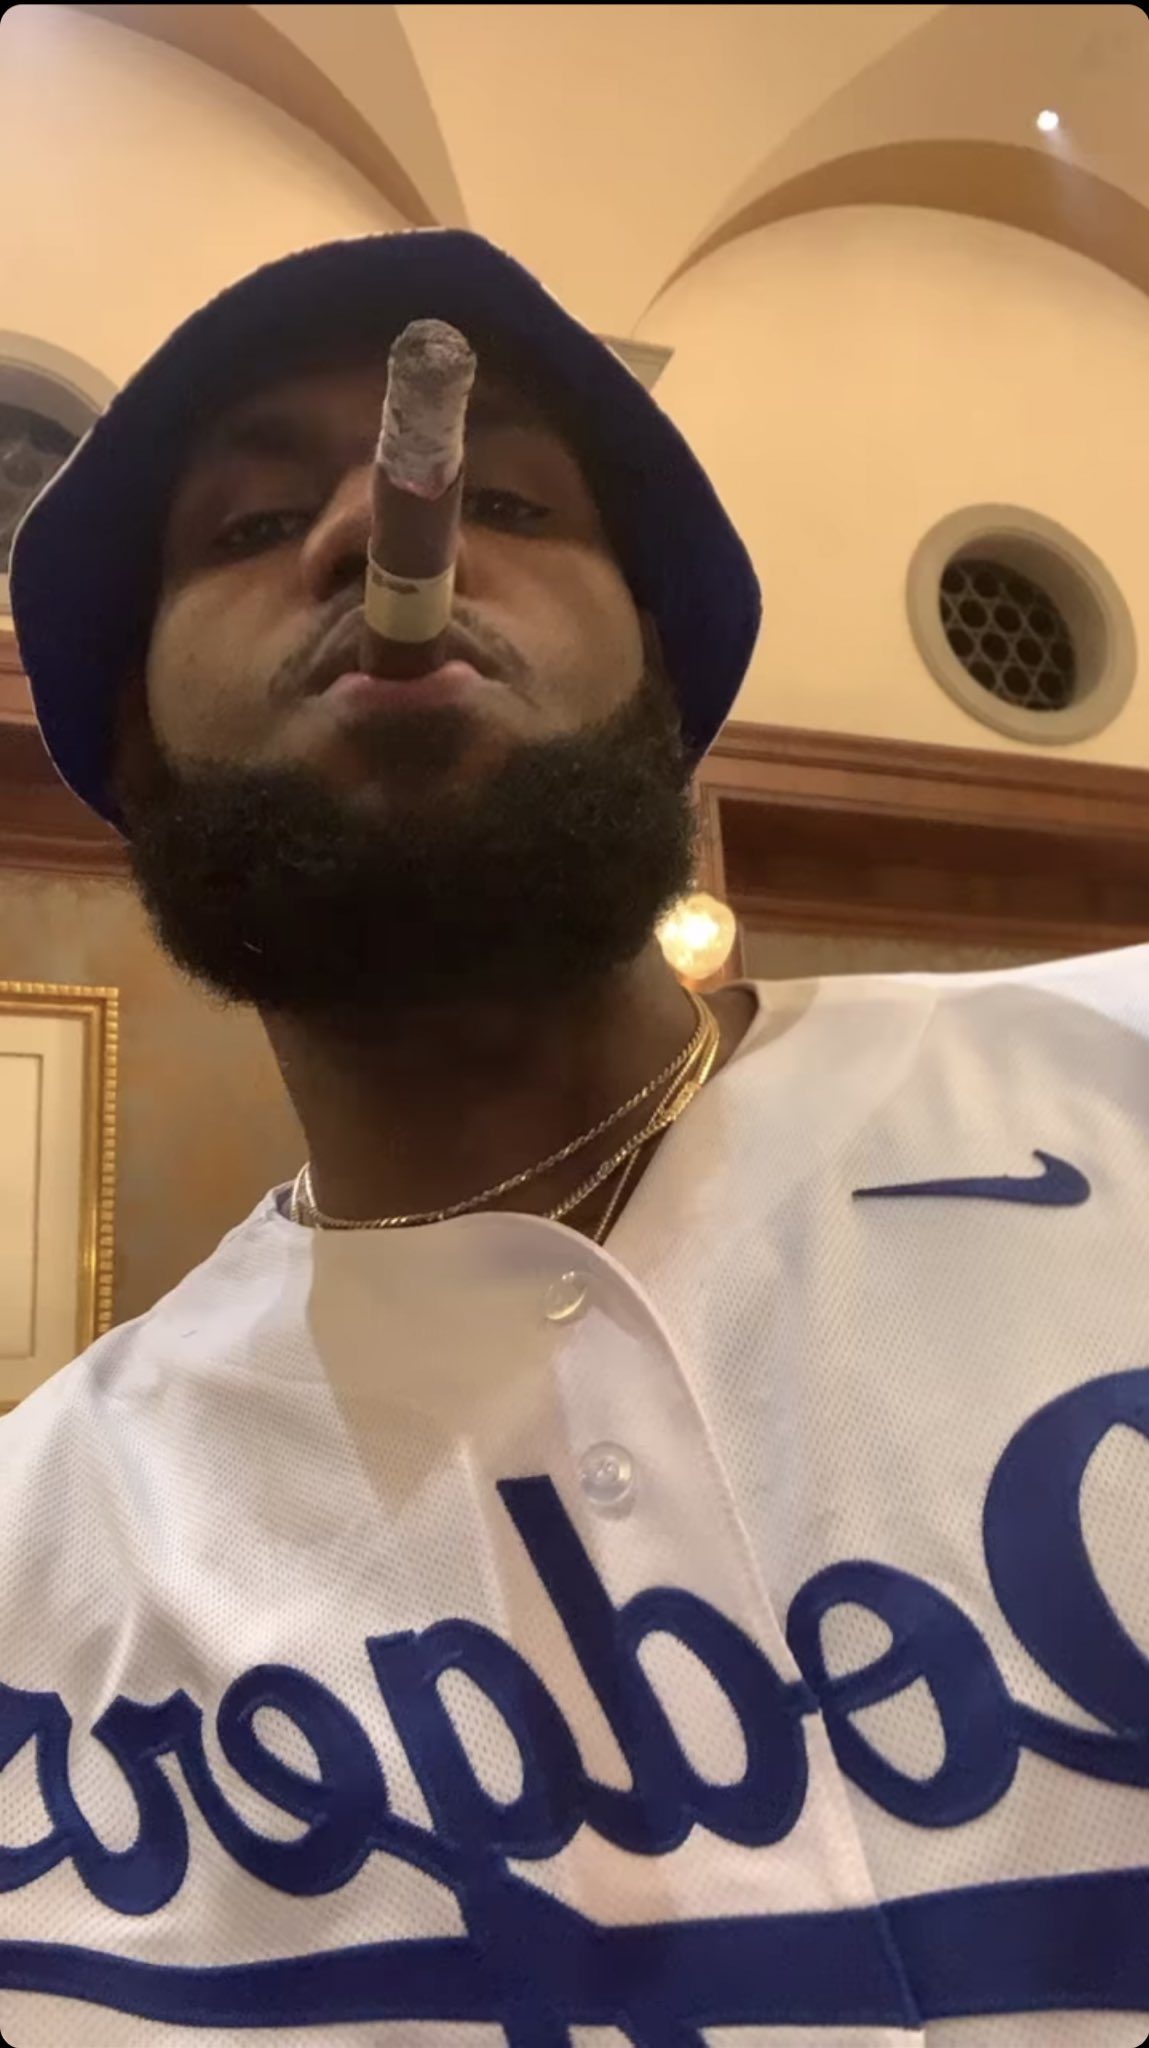 Following a Game 6 Win, LeBron James Reps the Dodgers